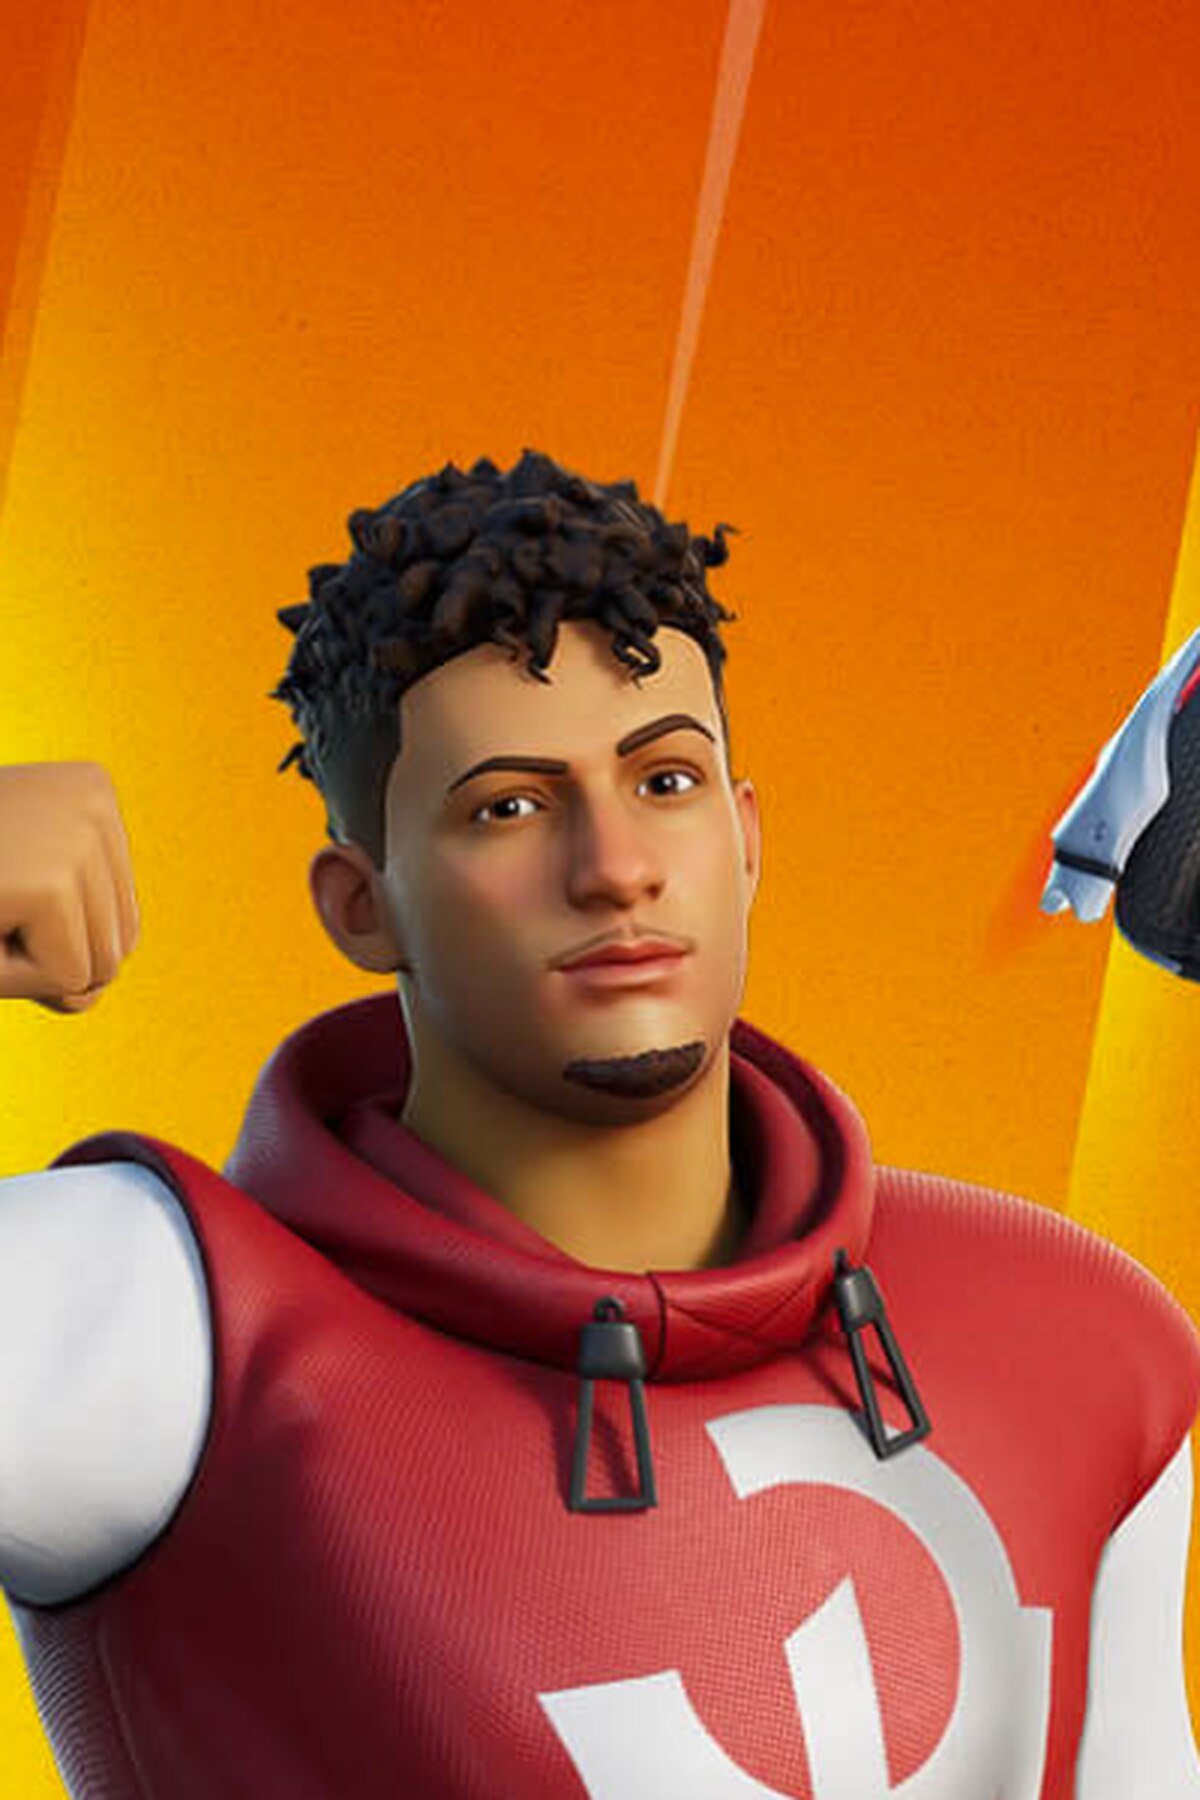 NFL Quarterback & MVP Patrick Mahomes makes a play in the Fortnite Icon Series